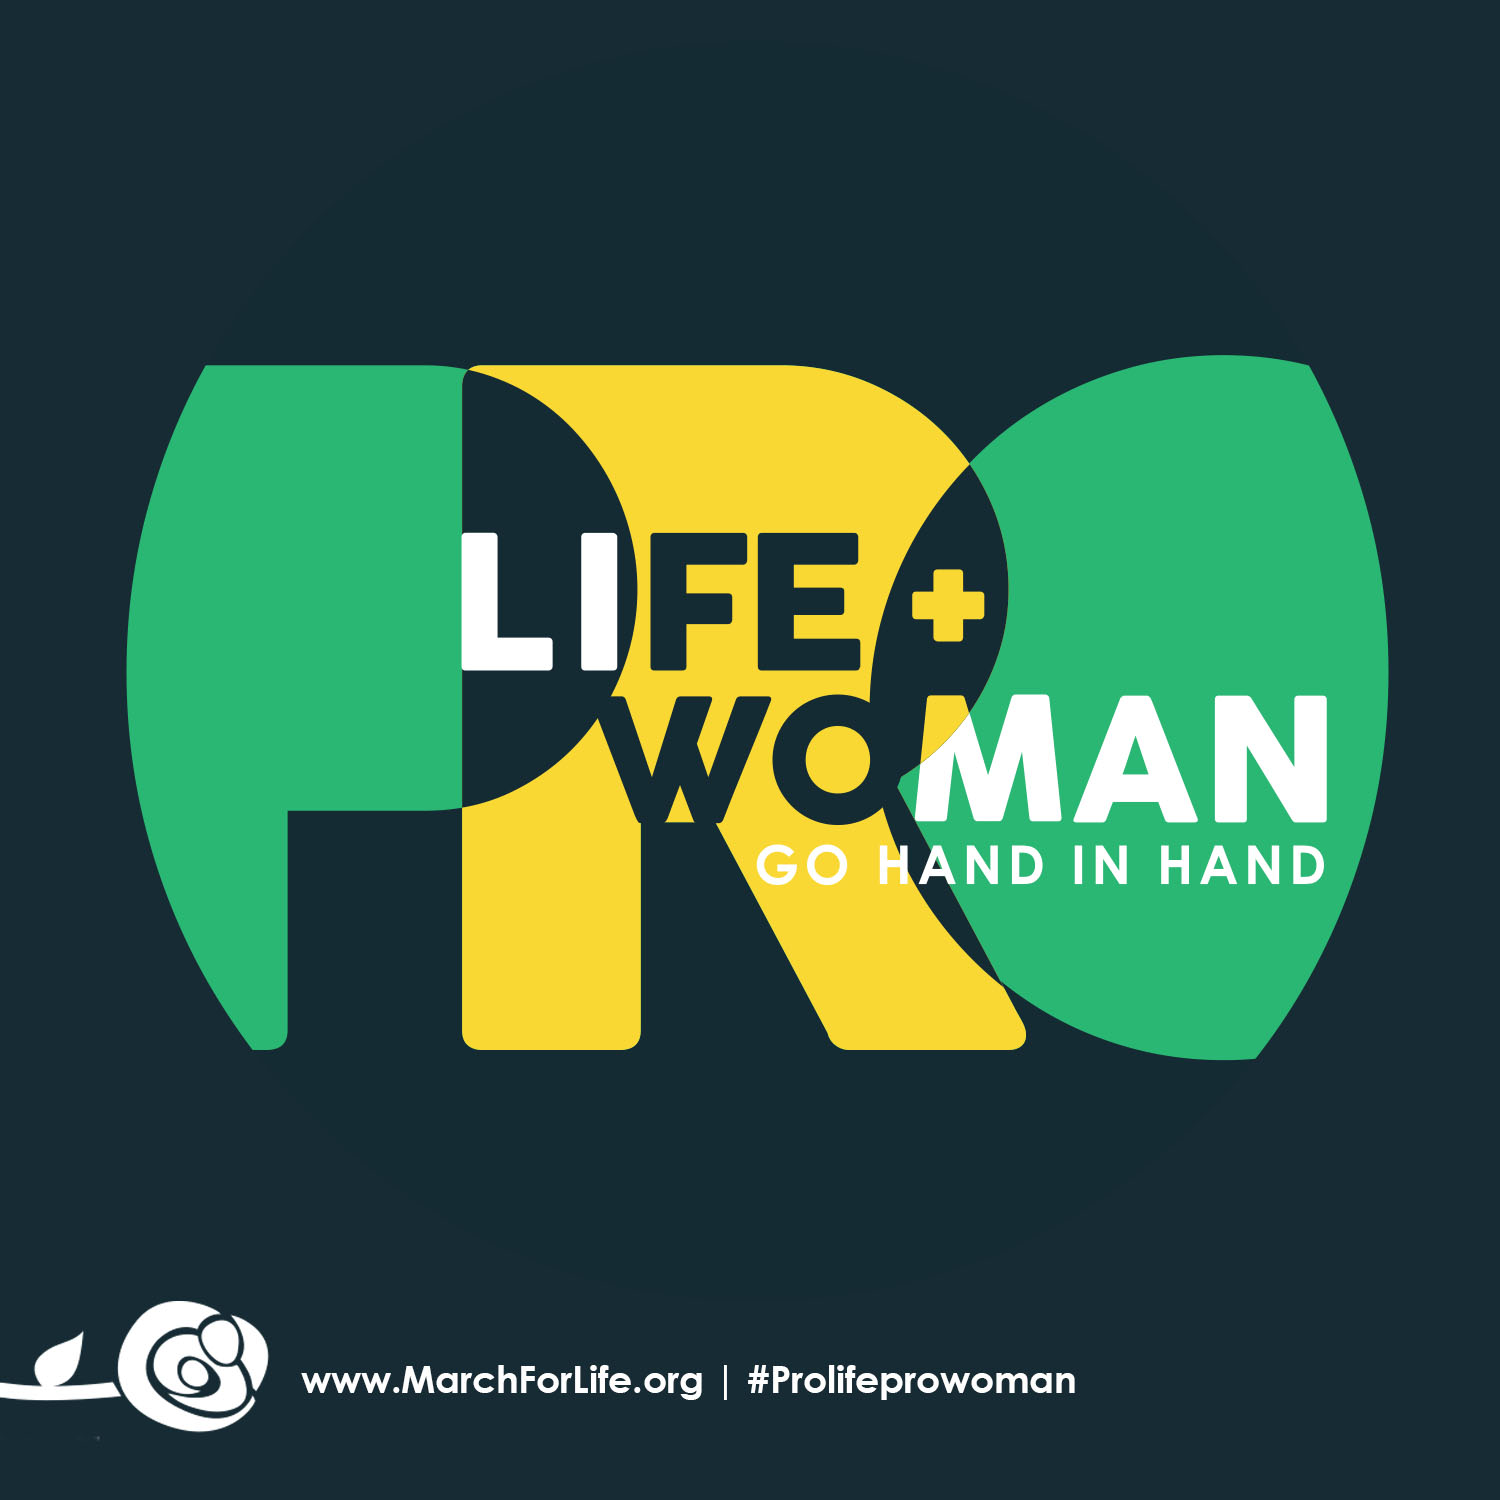 pro-life, pro-woman, together